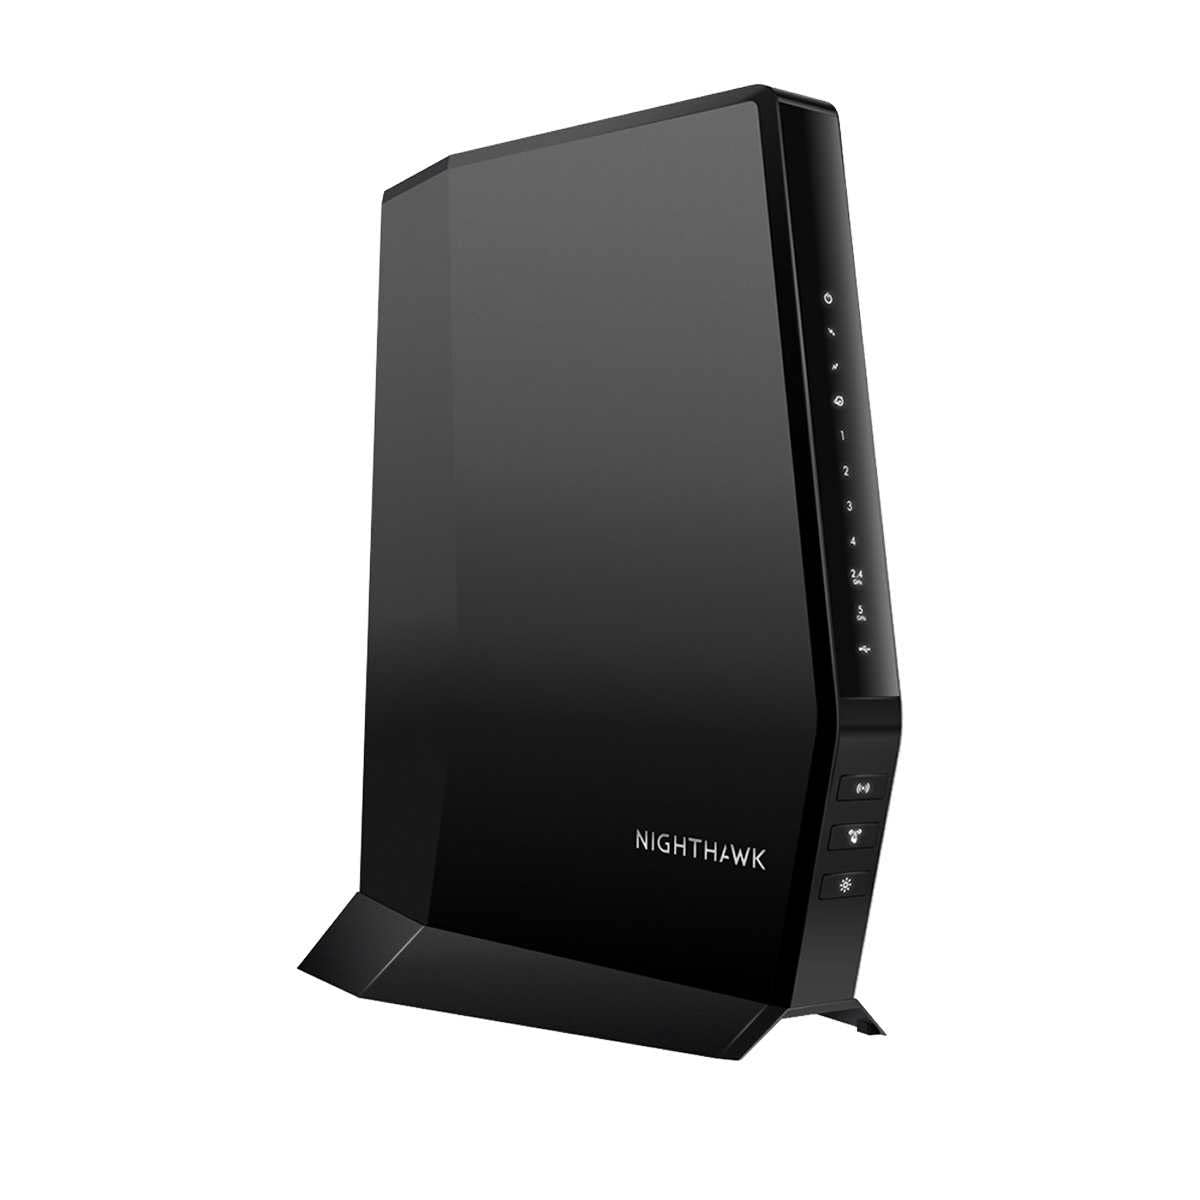 NETgEAR Nighthawk WiFi 6cable Modem Router cAX30 compatible with Xfinity, Spectrum, and cox, AX2700 (Up to 27gbps) DOcSIS 31